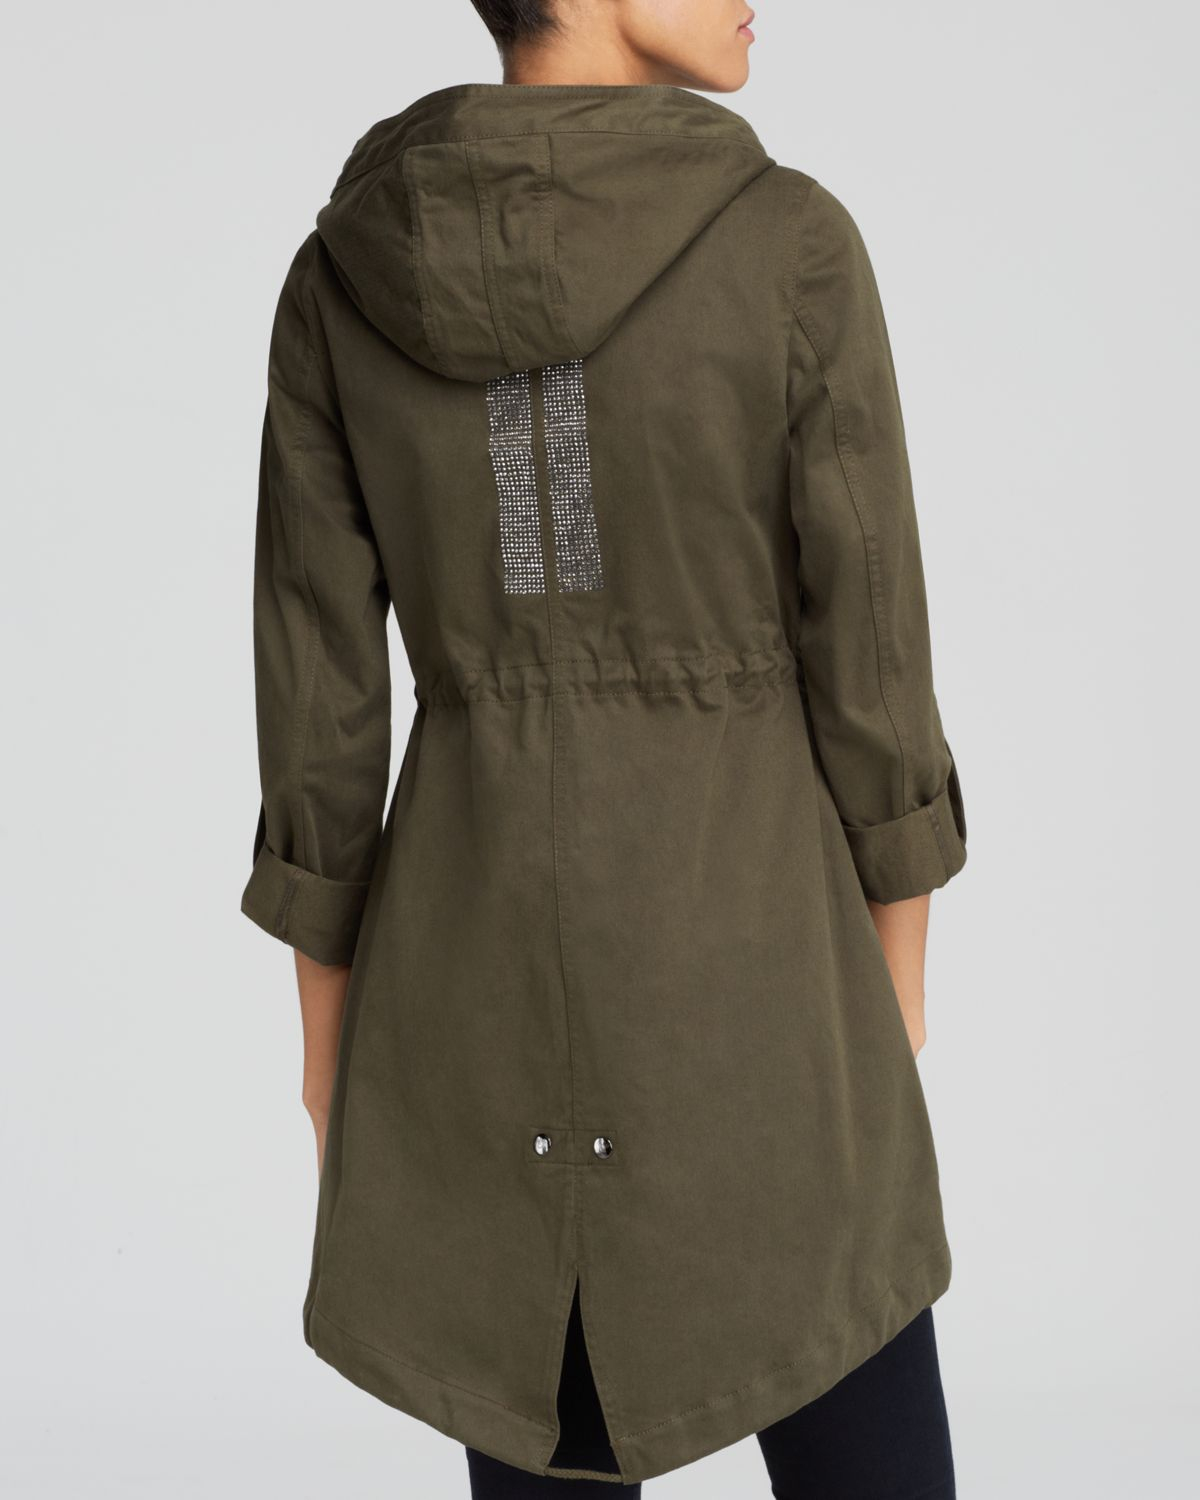 DL2 Dawn Levy Lia Moleskin womens Olive green fishtail Hooded Trench